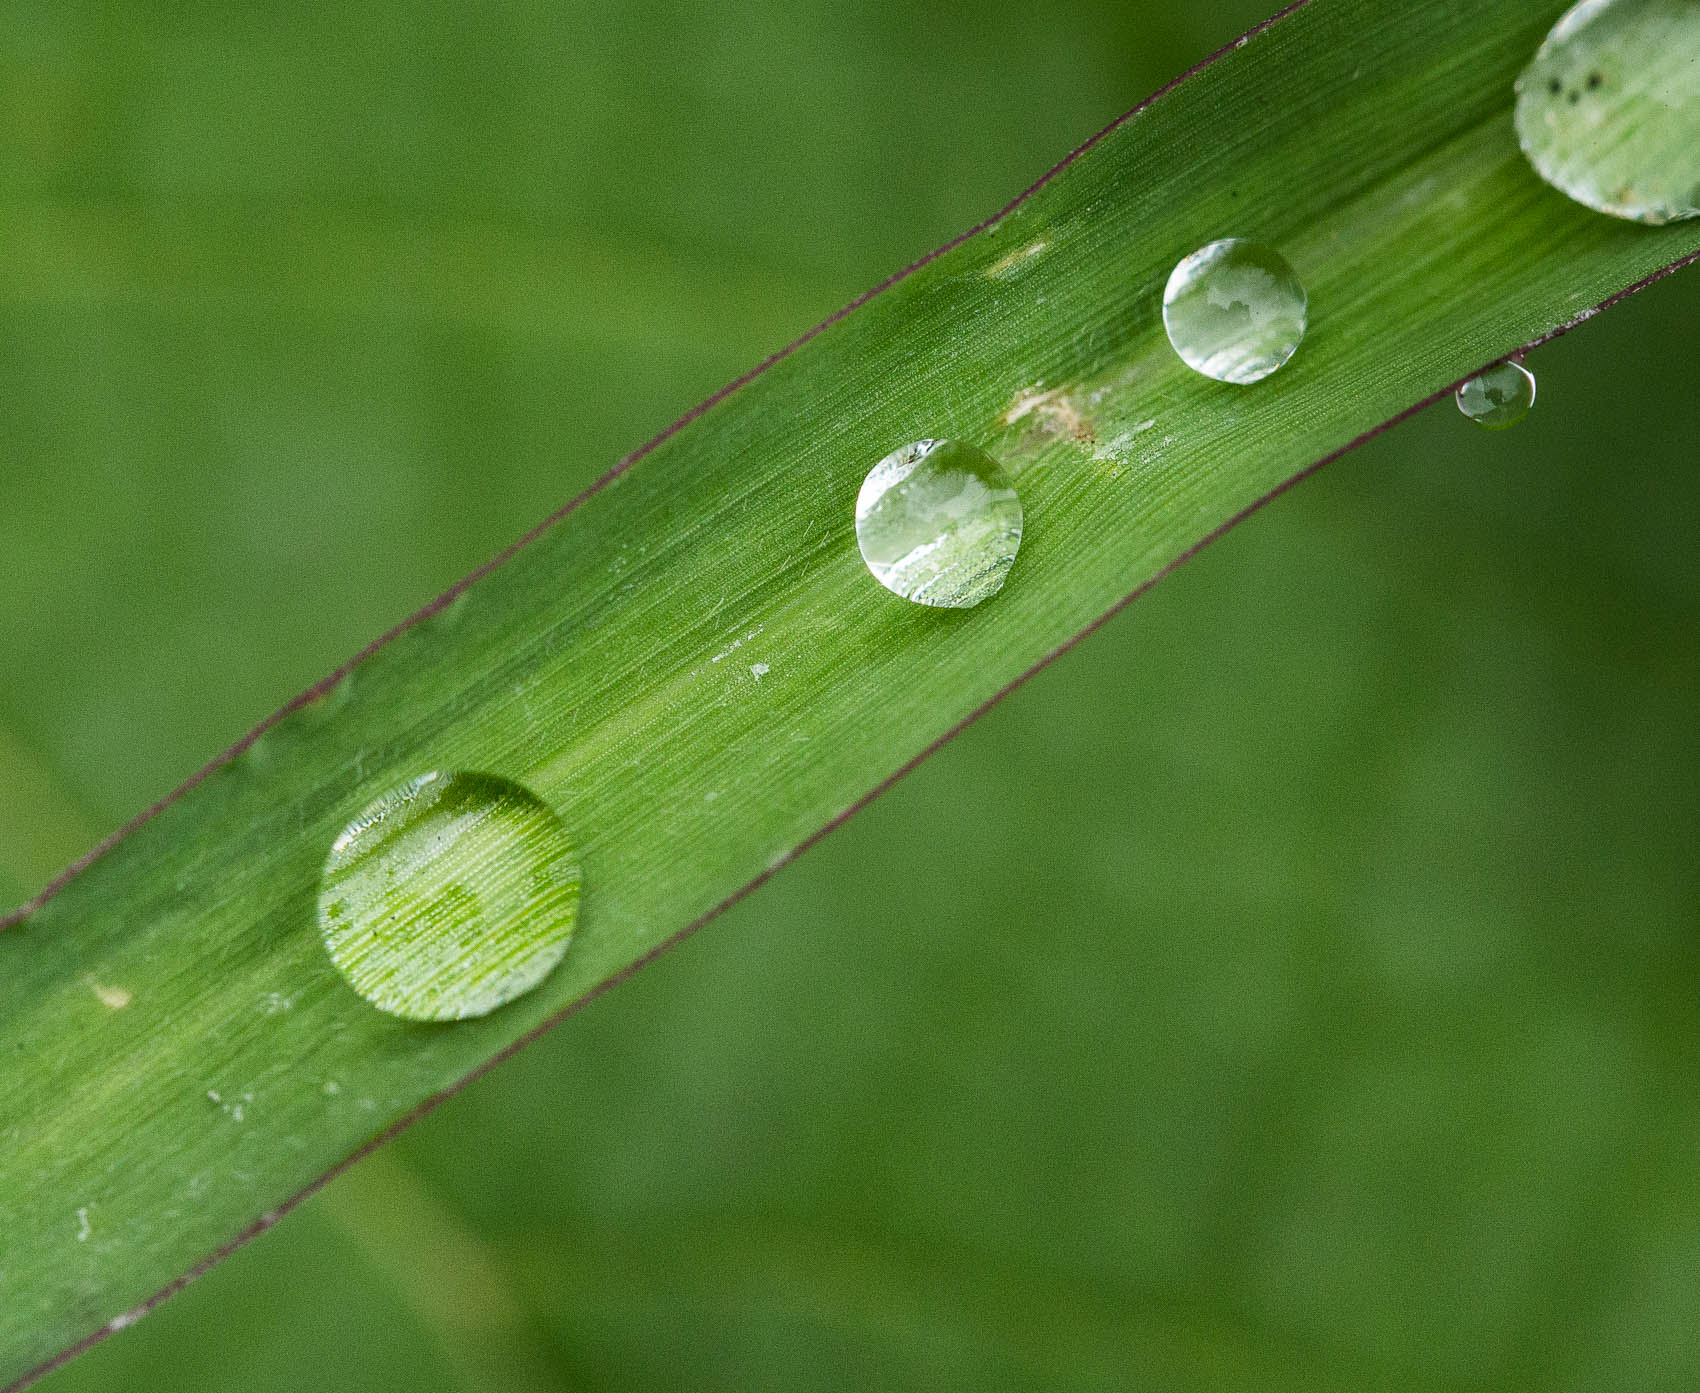 Water droplets on grass stem